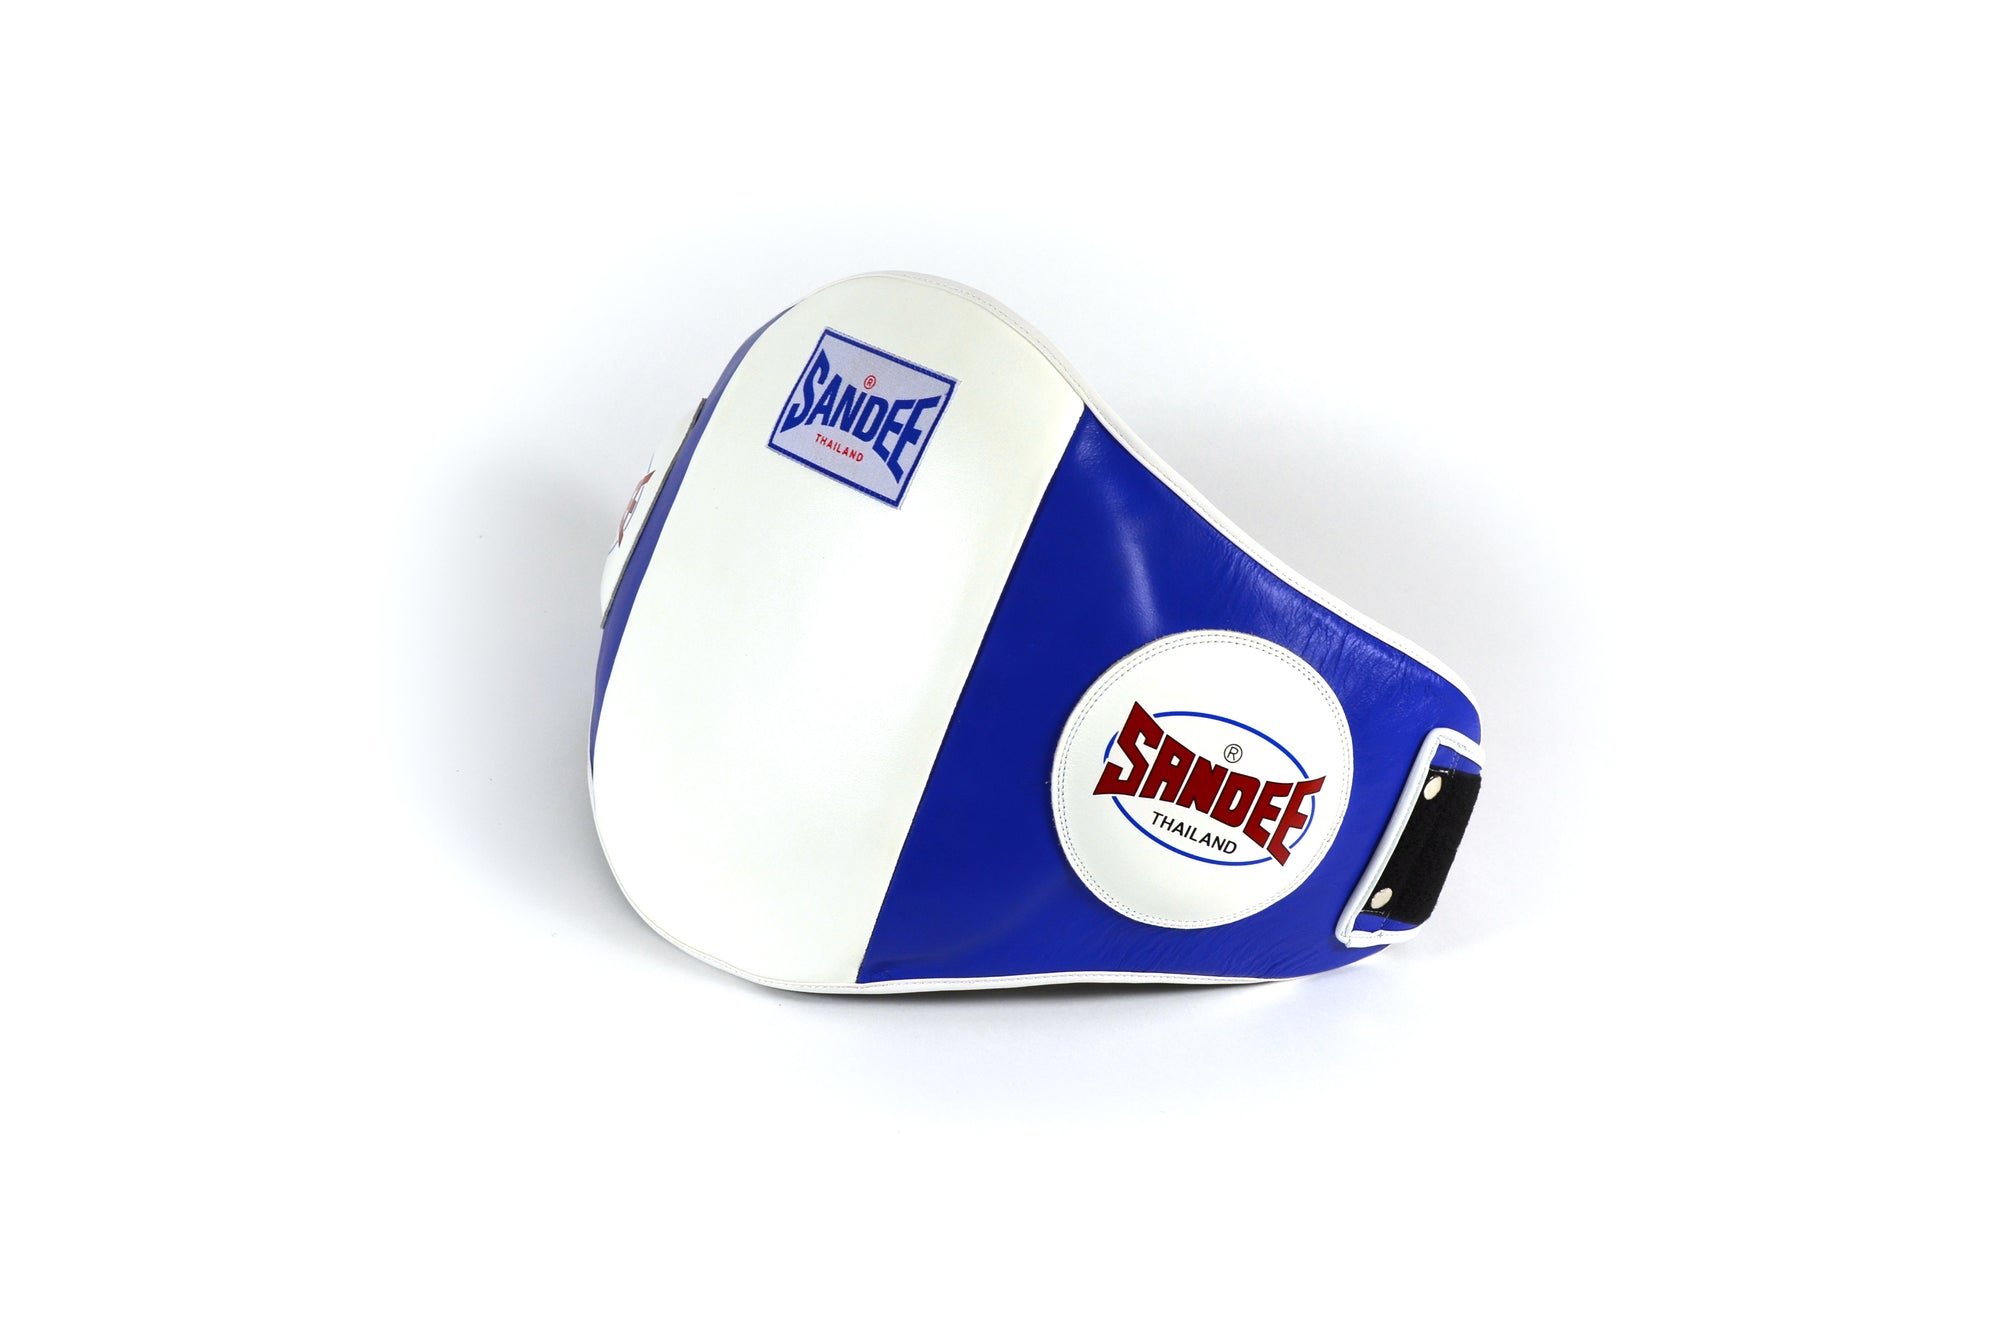 Sandee Muay Thai Boxing Belly Pad  Fight Co